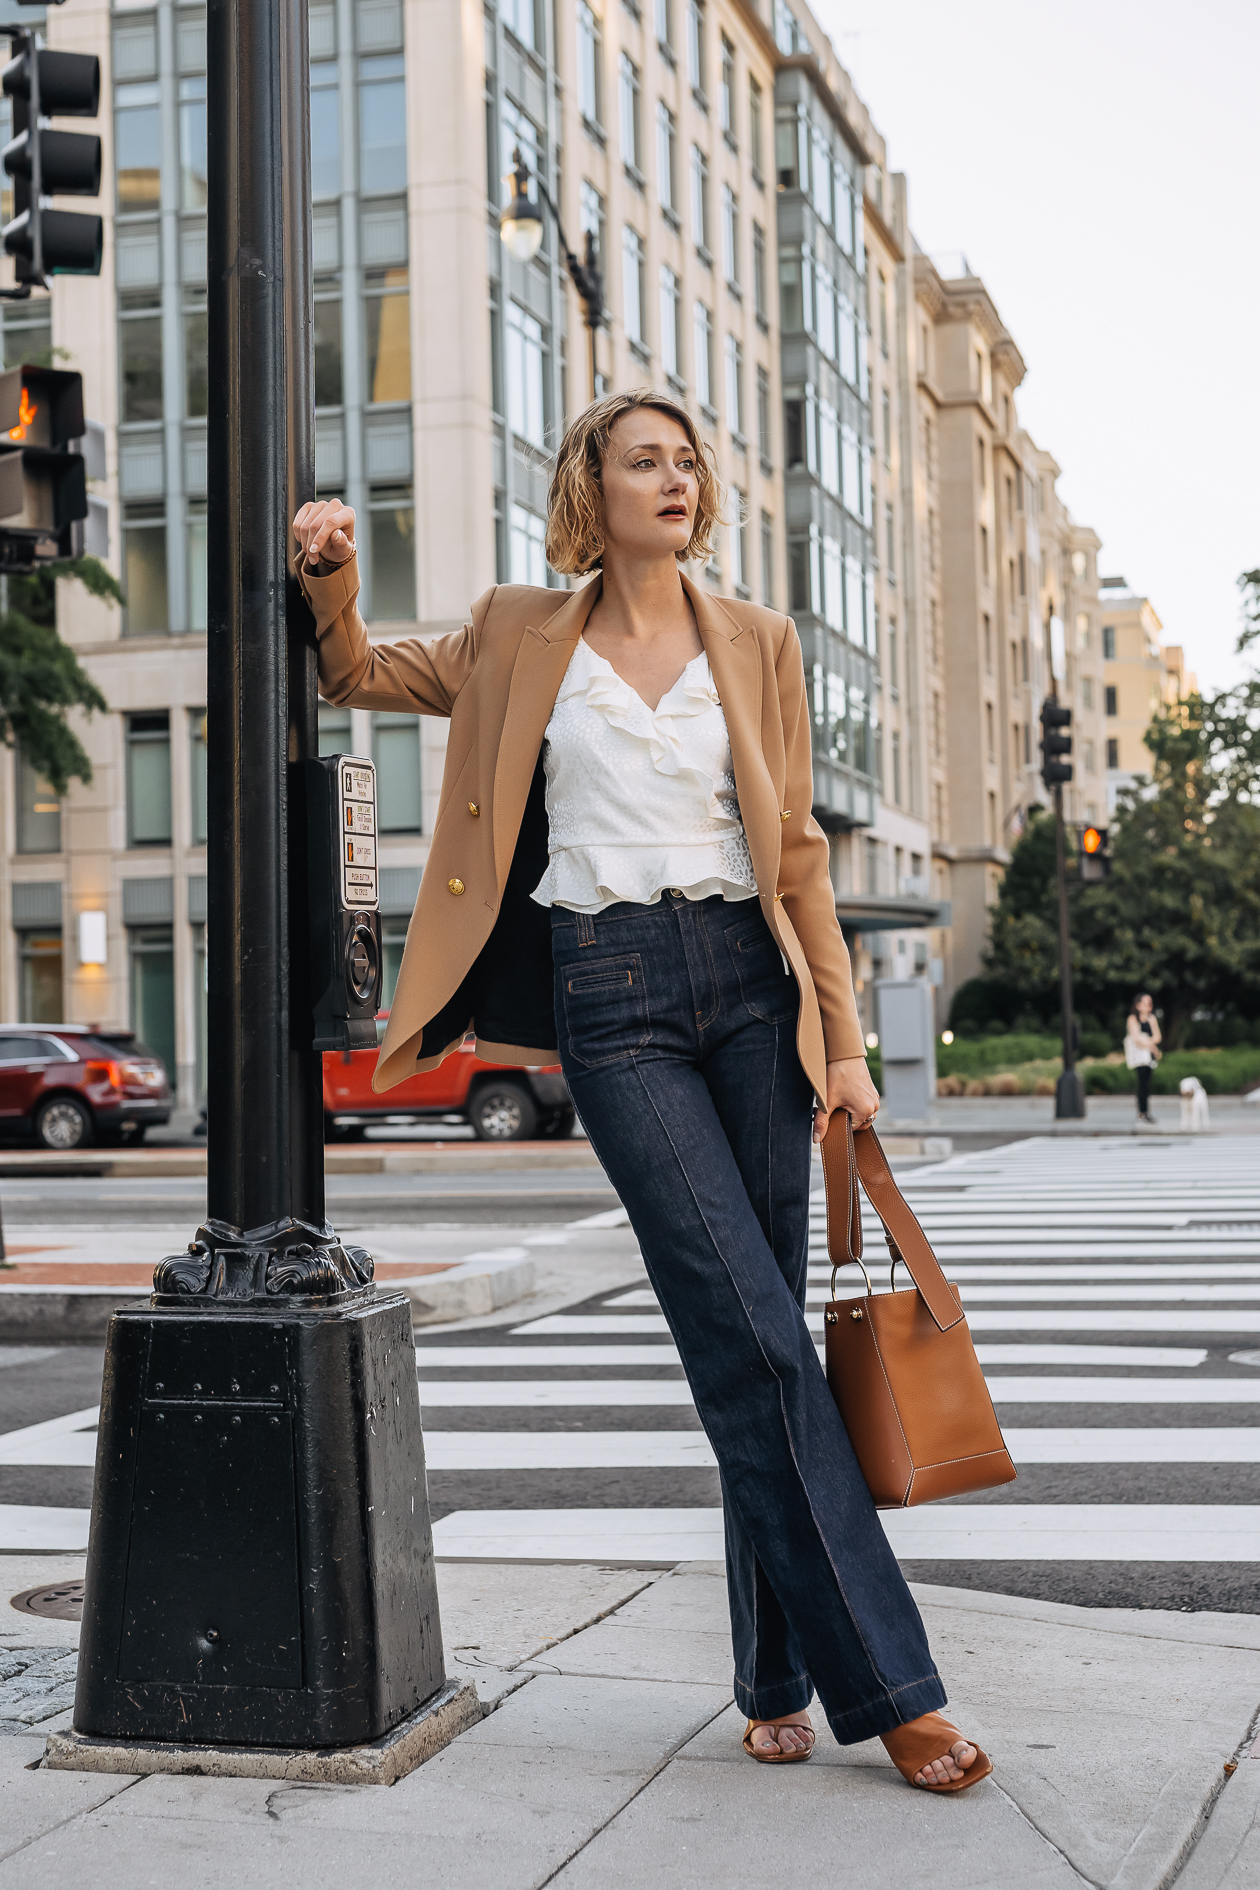 5 Trendy Bag Styles for Fall